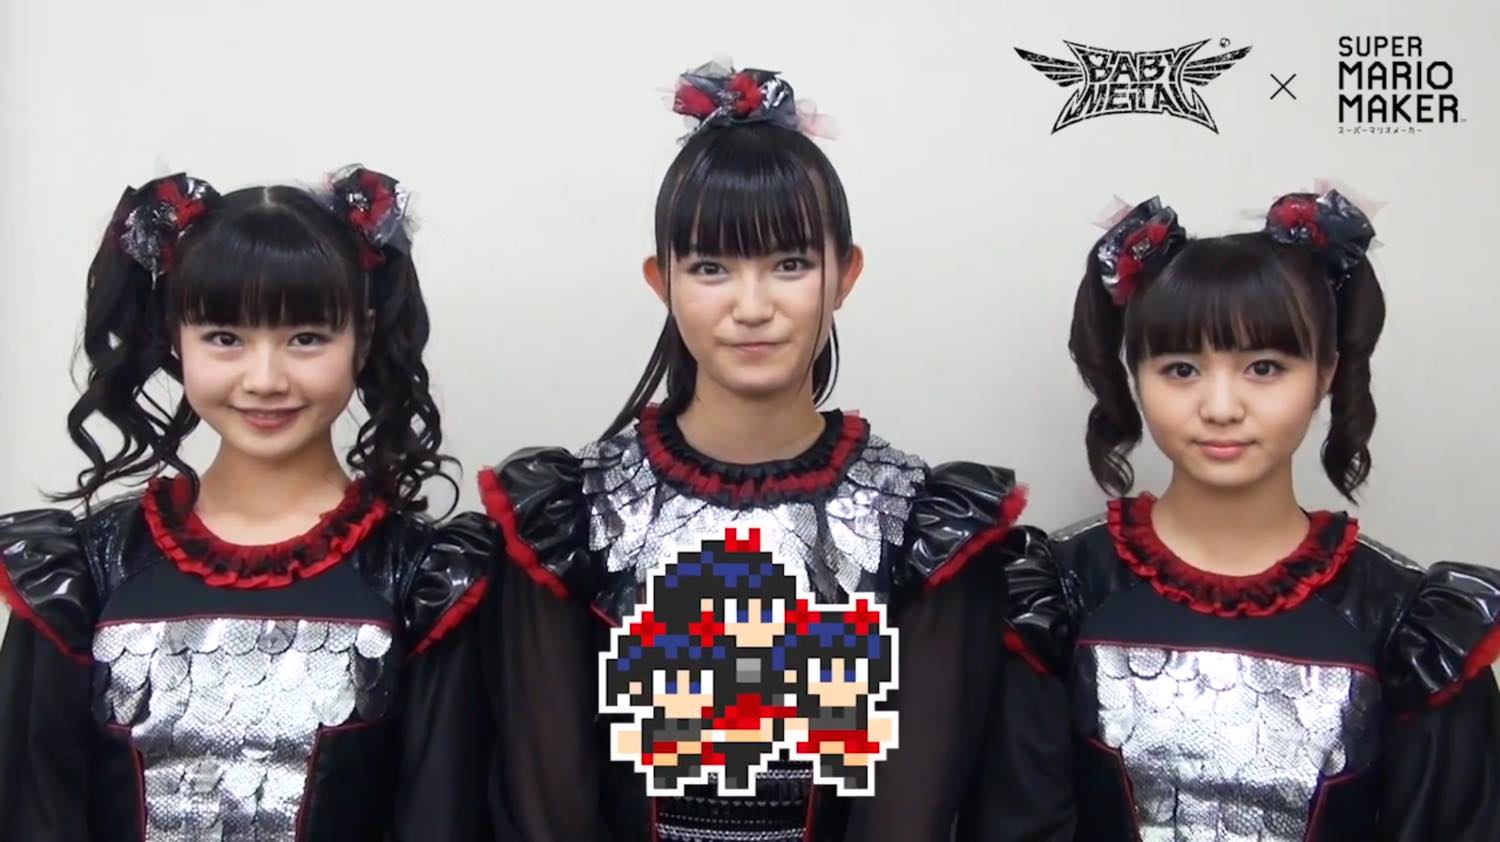 BABYMETAL x Super Mario Maker Collaboration! Unlock Their Special Character!